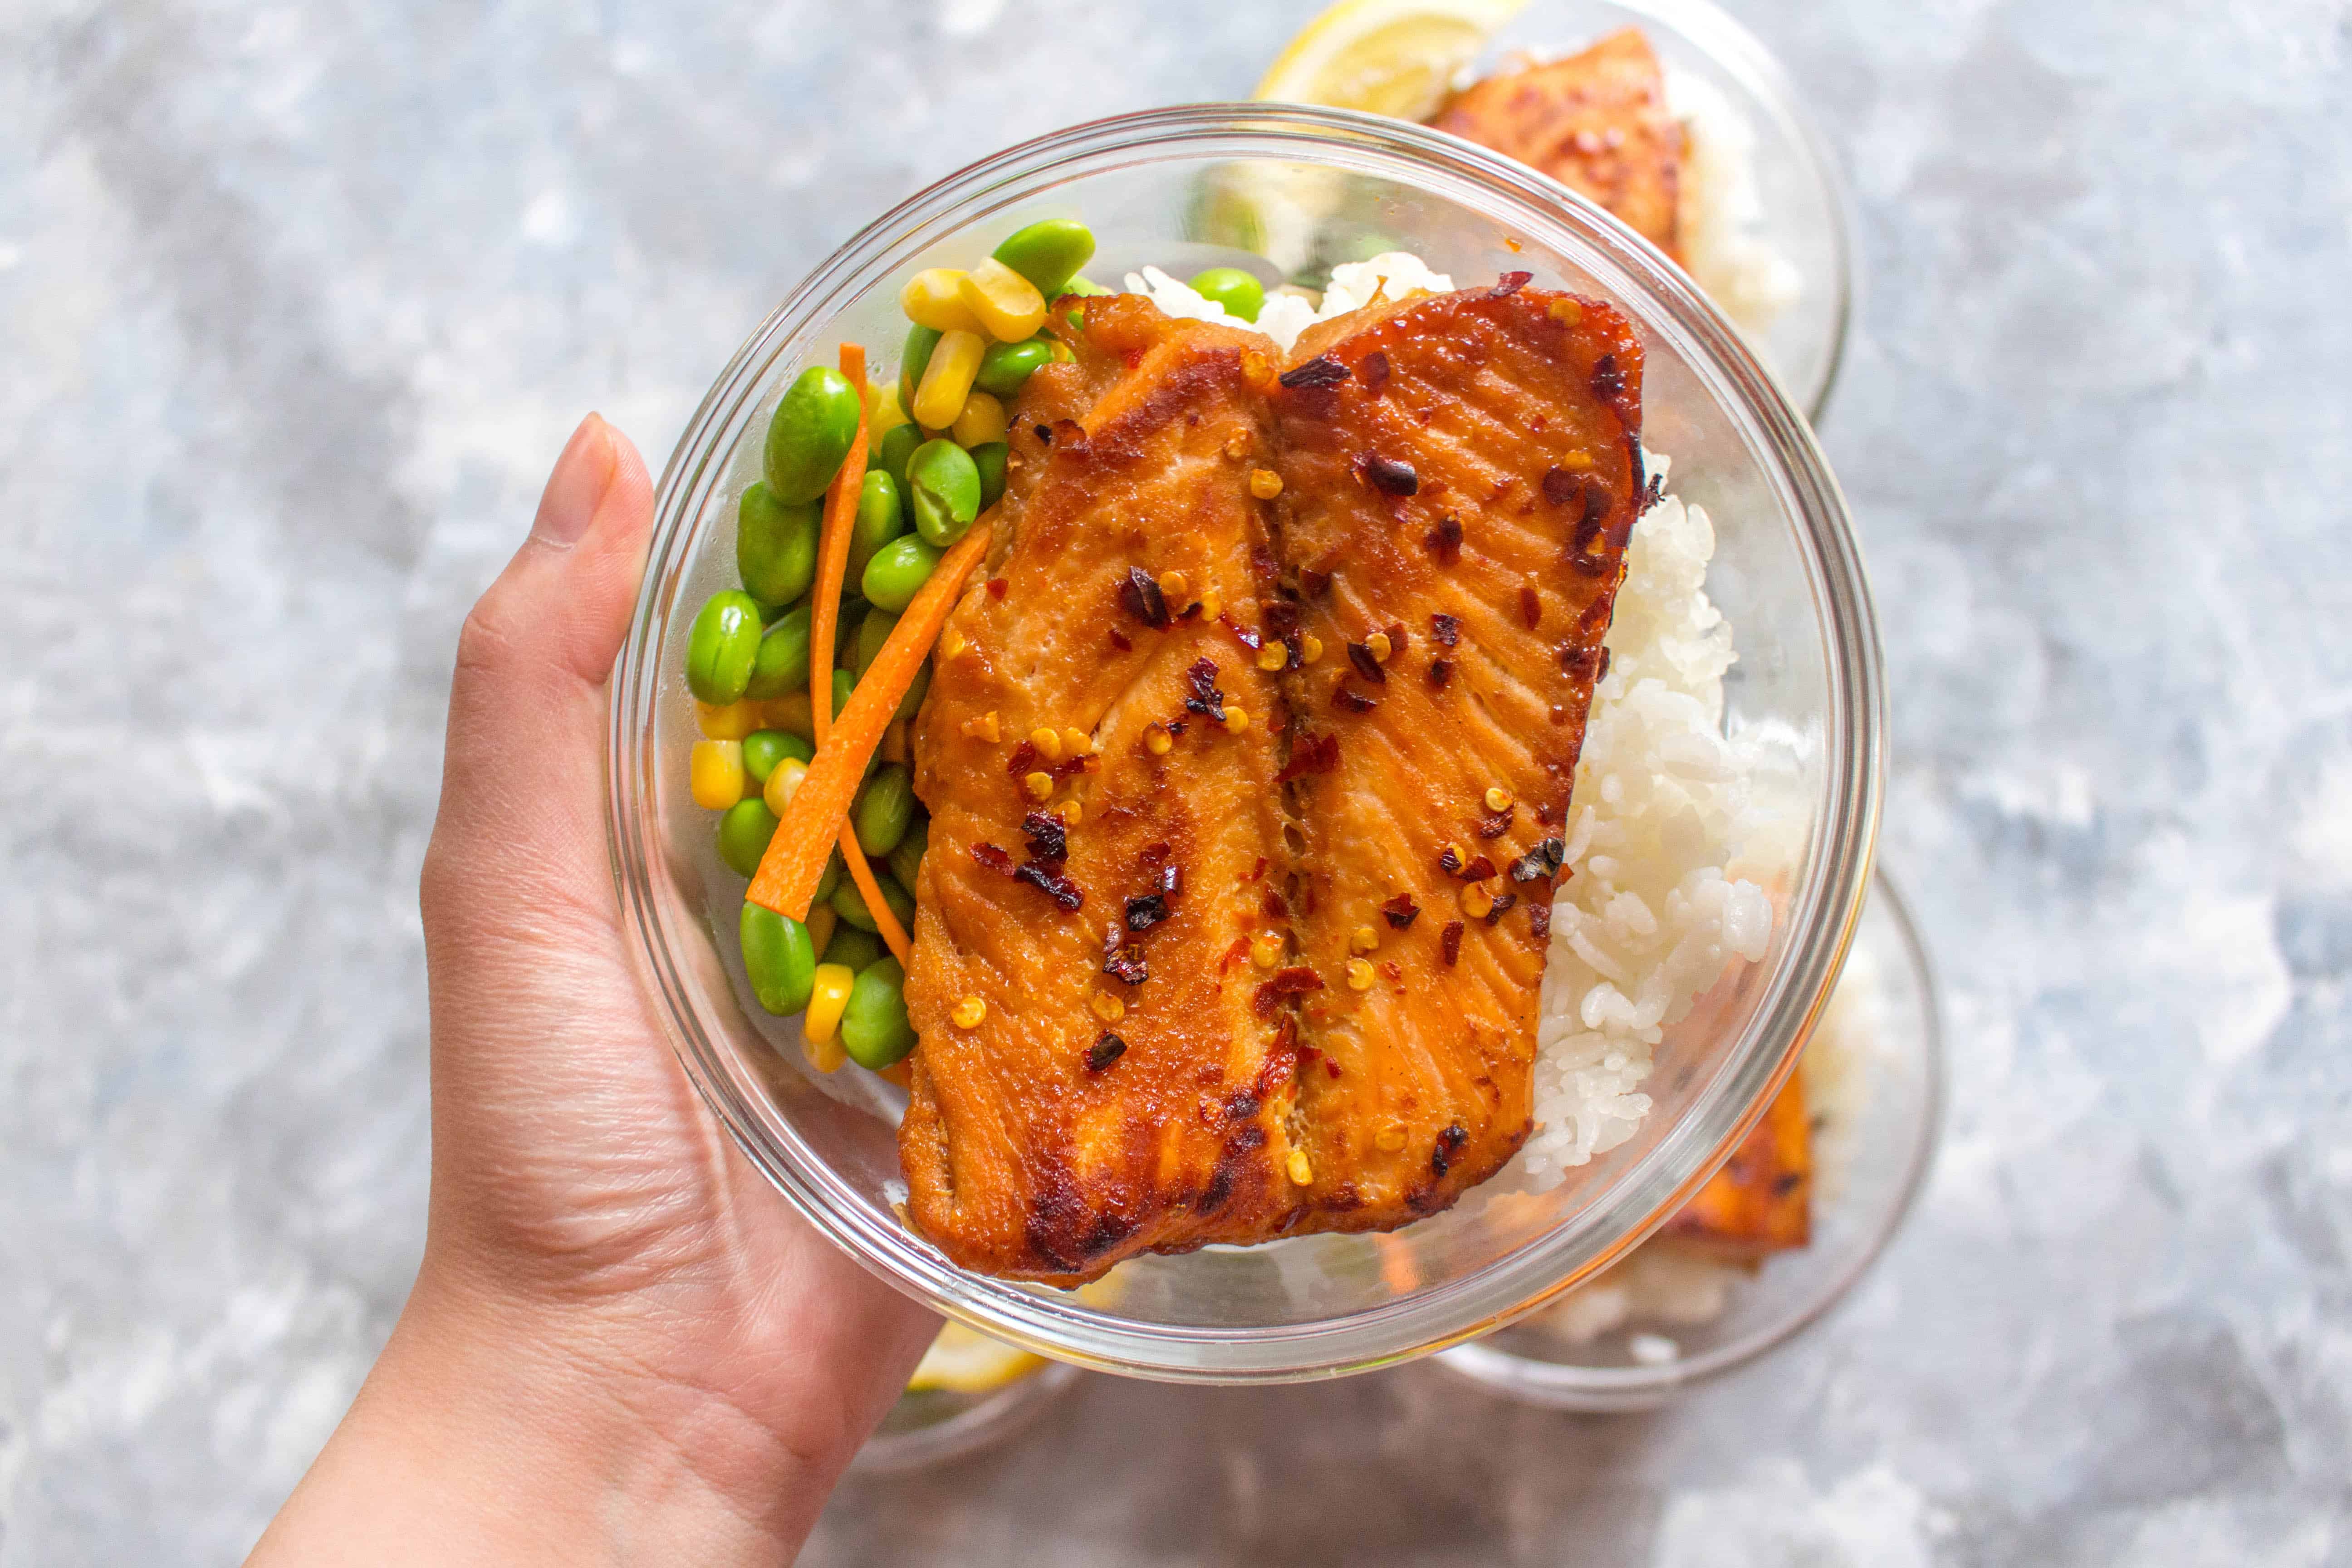 This quick and easy Sweet Chili Salmon Meal Prep is super delicious, flavourful, and my new go-to meal! It makes for the perfect meal prep and a tasty weeknight dinner!